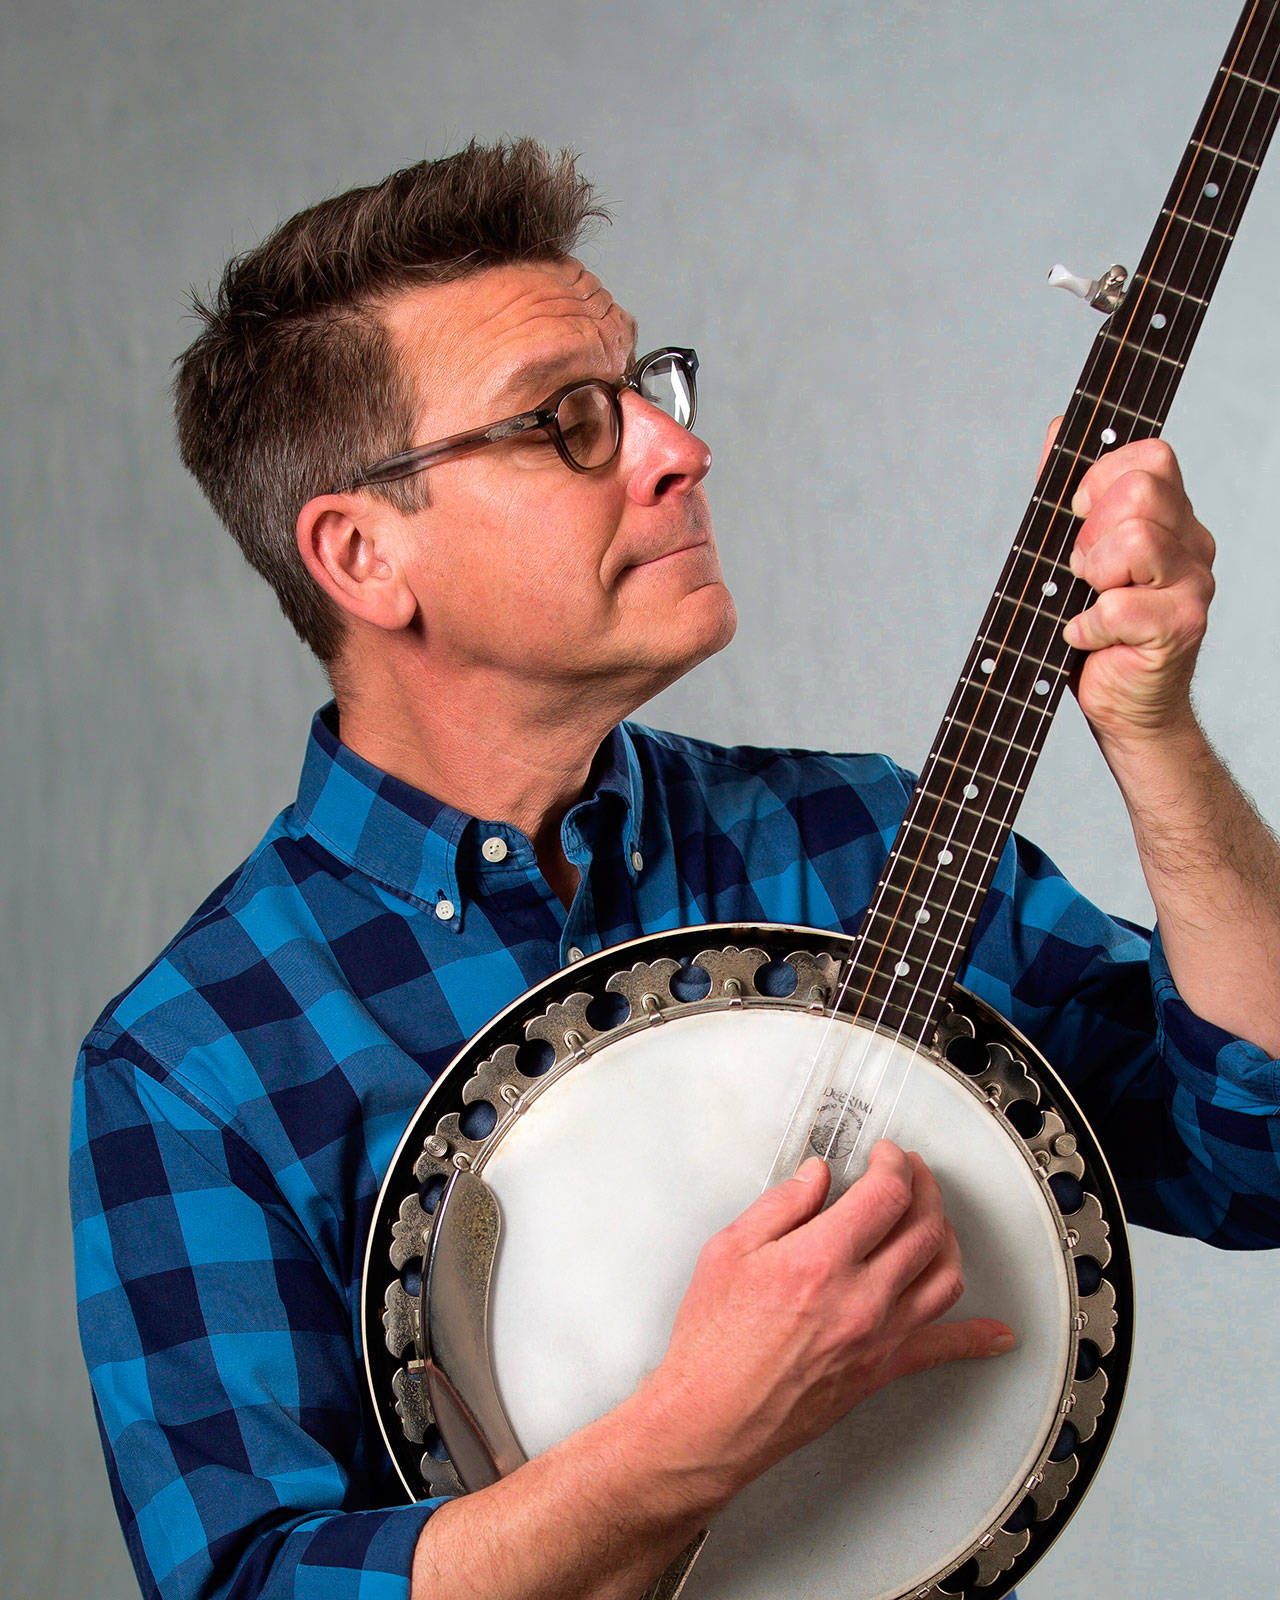 Jim Gill brings “Sing-A-Thon of Celebrated Songs” to libraries on the Olympic Peninsula this month.